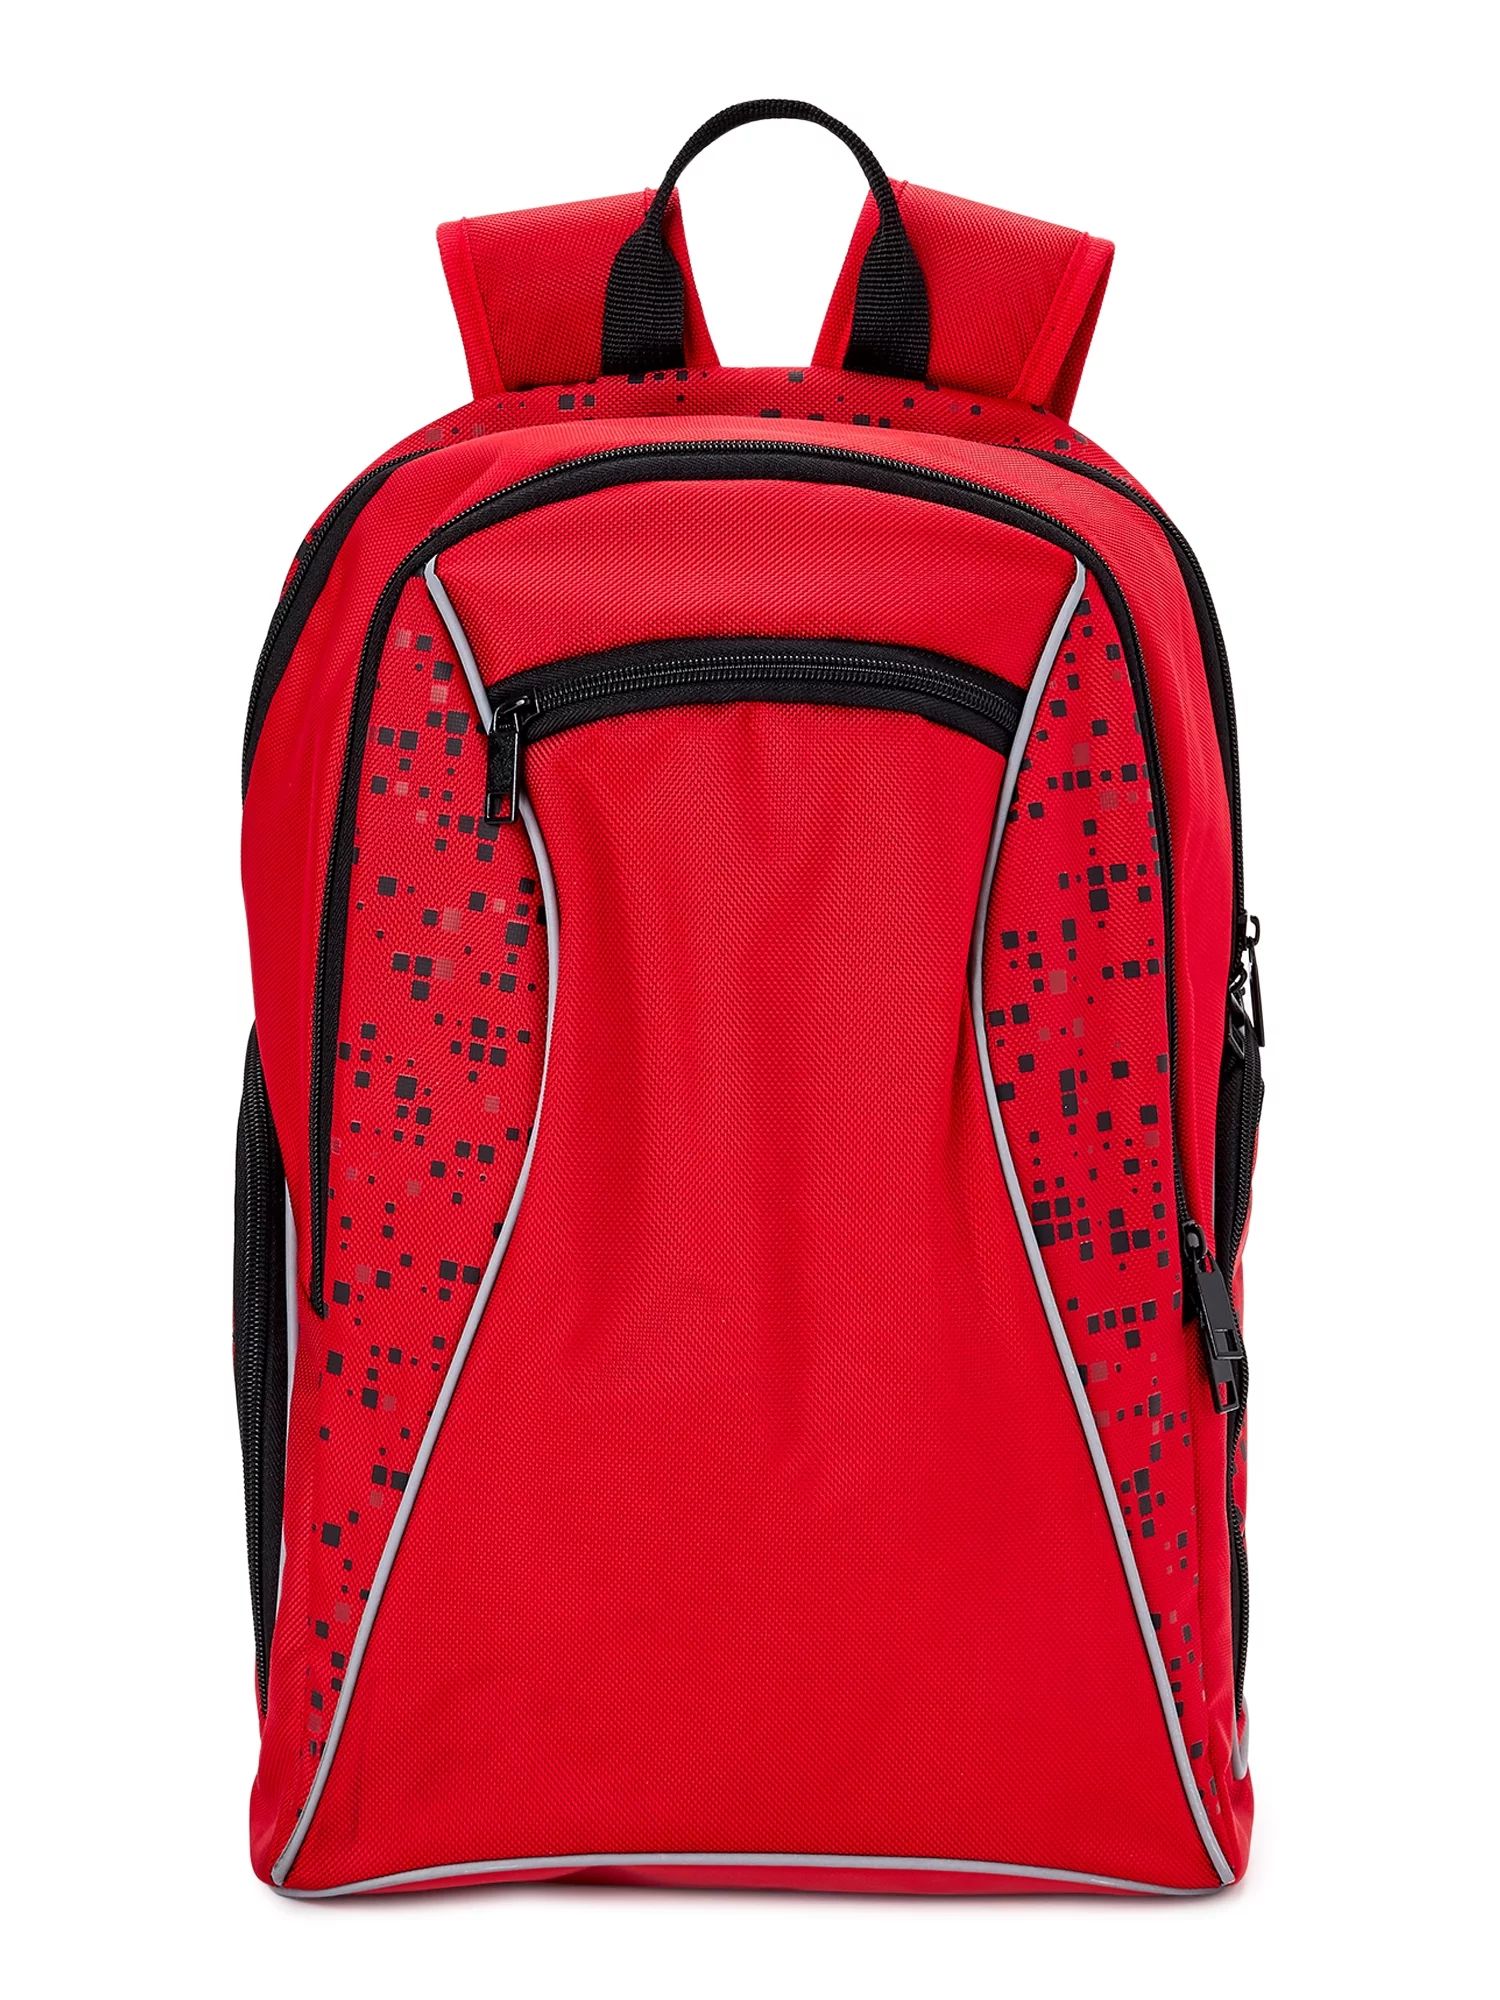 Padded, adjustable straps with reflective piping | Walmart (US)